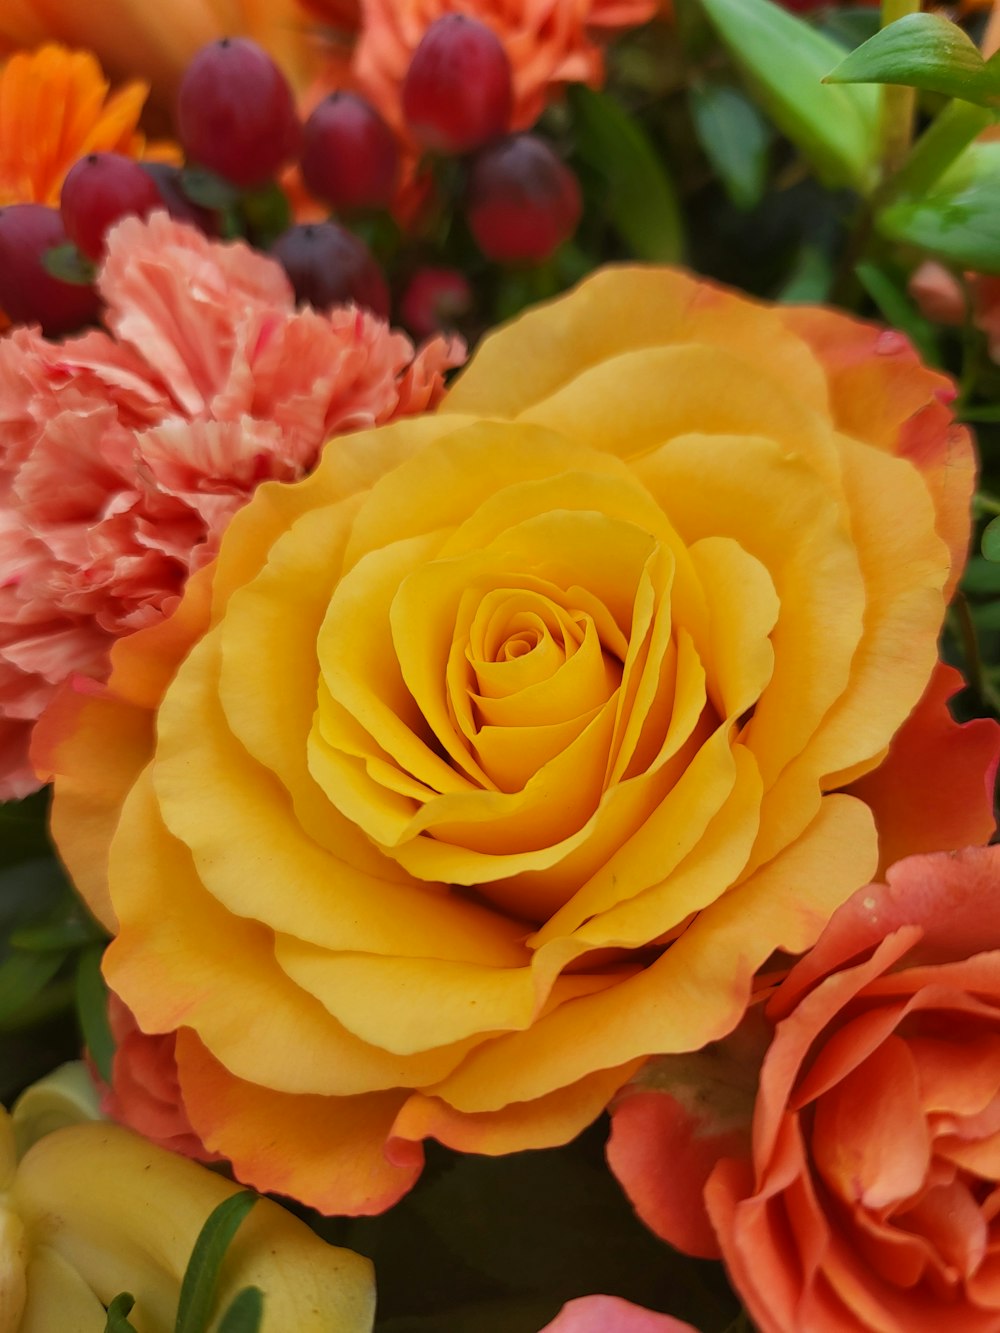 a close up of a yellow rose surrounded by other flowers